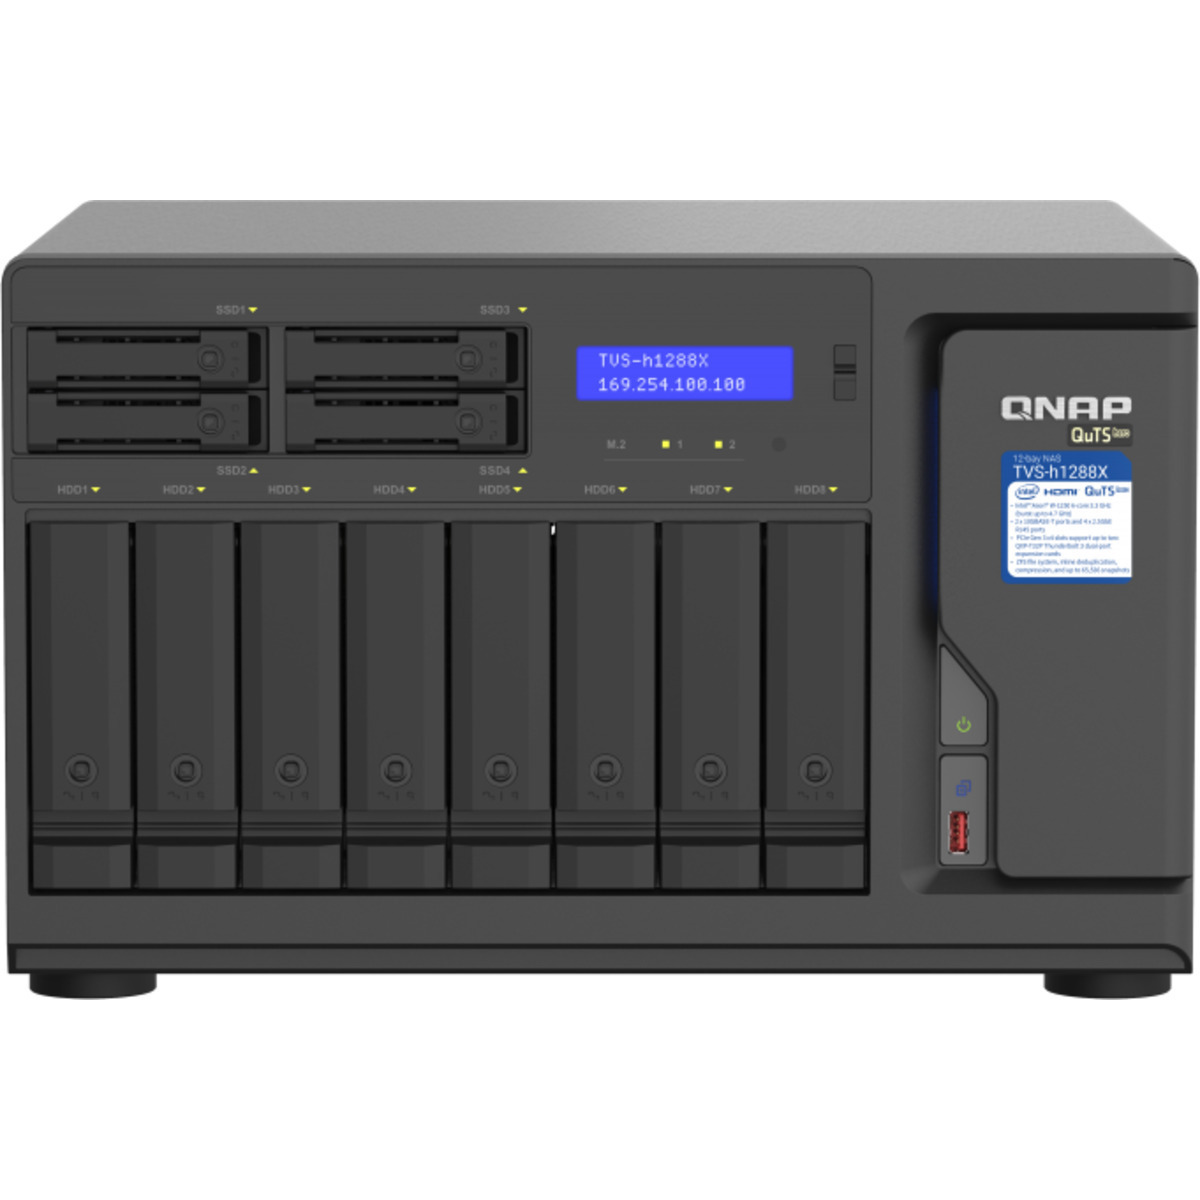 QNAP TVS-h1288X QuTS hero NAS 96tb 8+4-Bay Desktop Multimedia / Power User / Business NAS - Network Attached Storage Device 4x24tb Western Digital Red Pro WD240KFGX 3.5 7200rpm SATA 6Gb/s HDD NAS Class Drives Installed - Burn-In Tested TVS-h1288X QuTS hero NAS